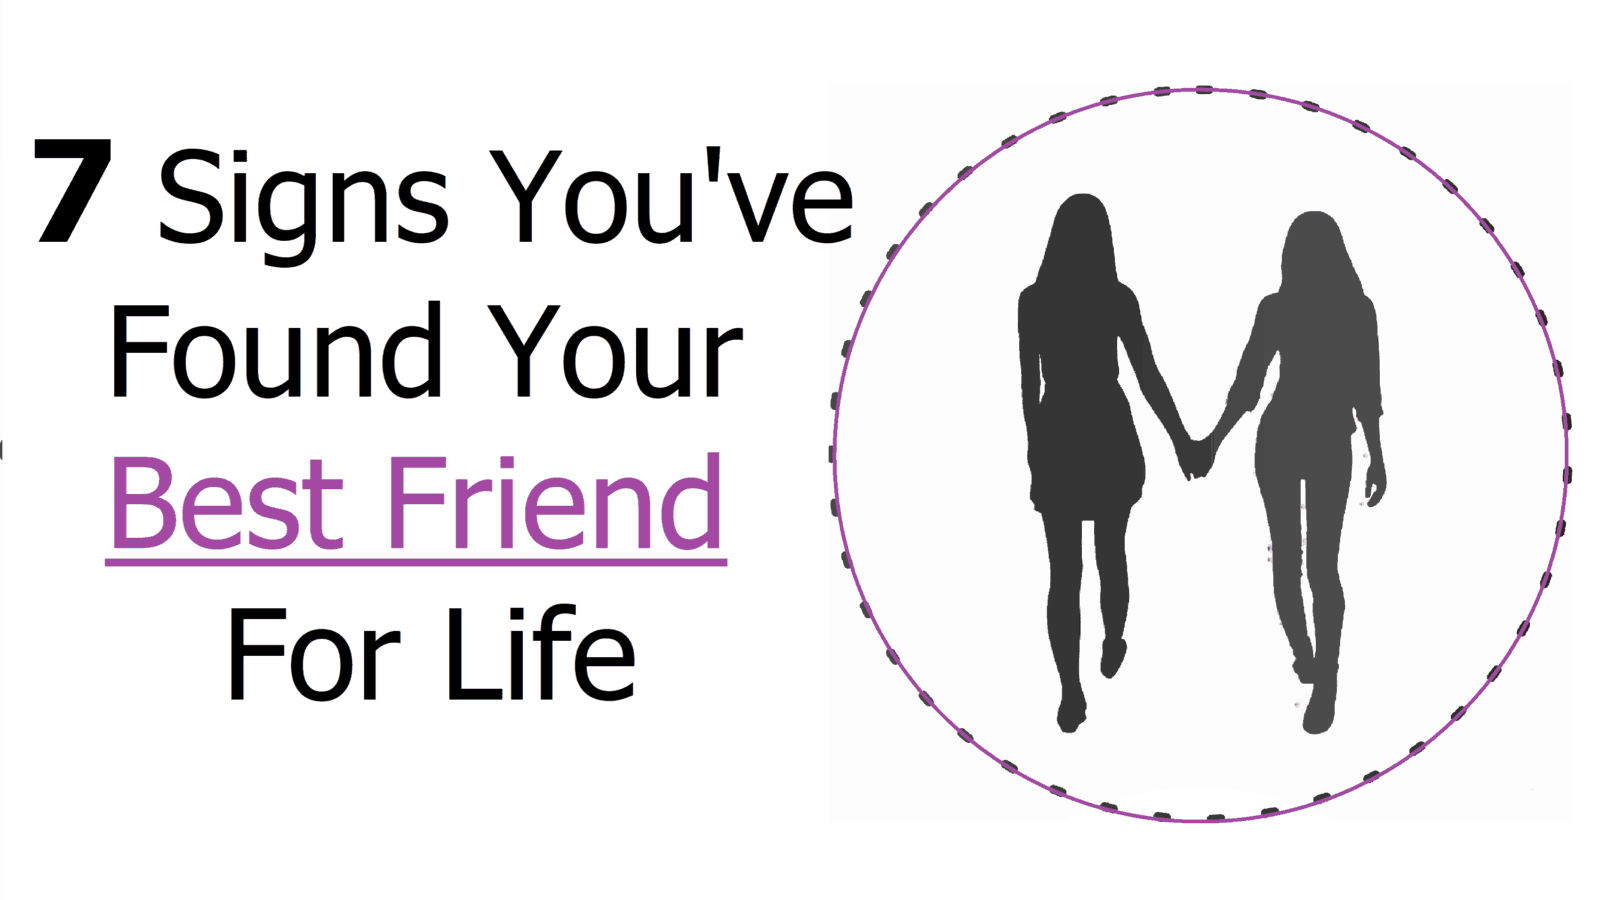 7 Signs You've Found Your Best Friend For Life